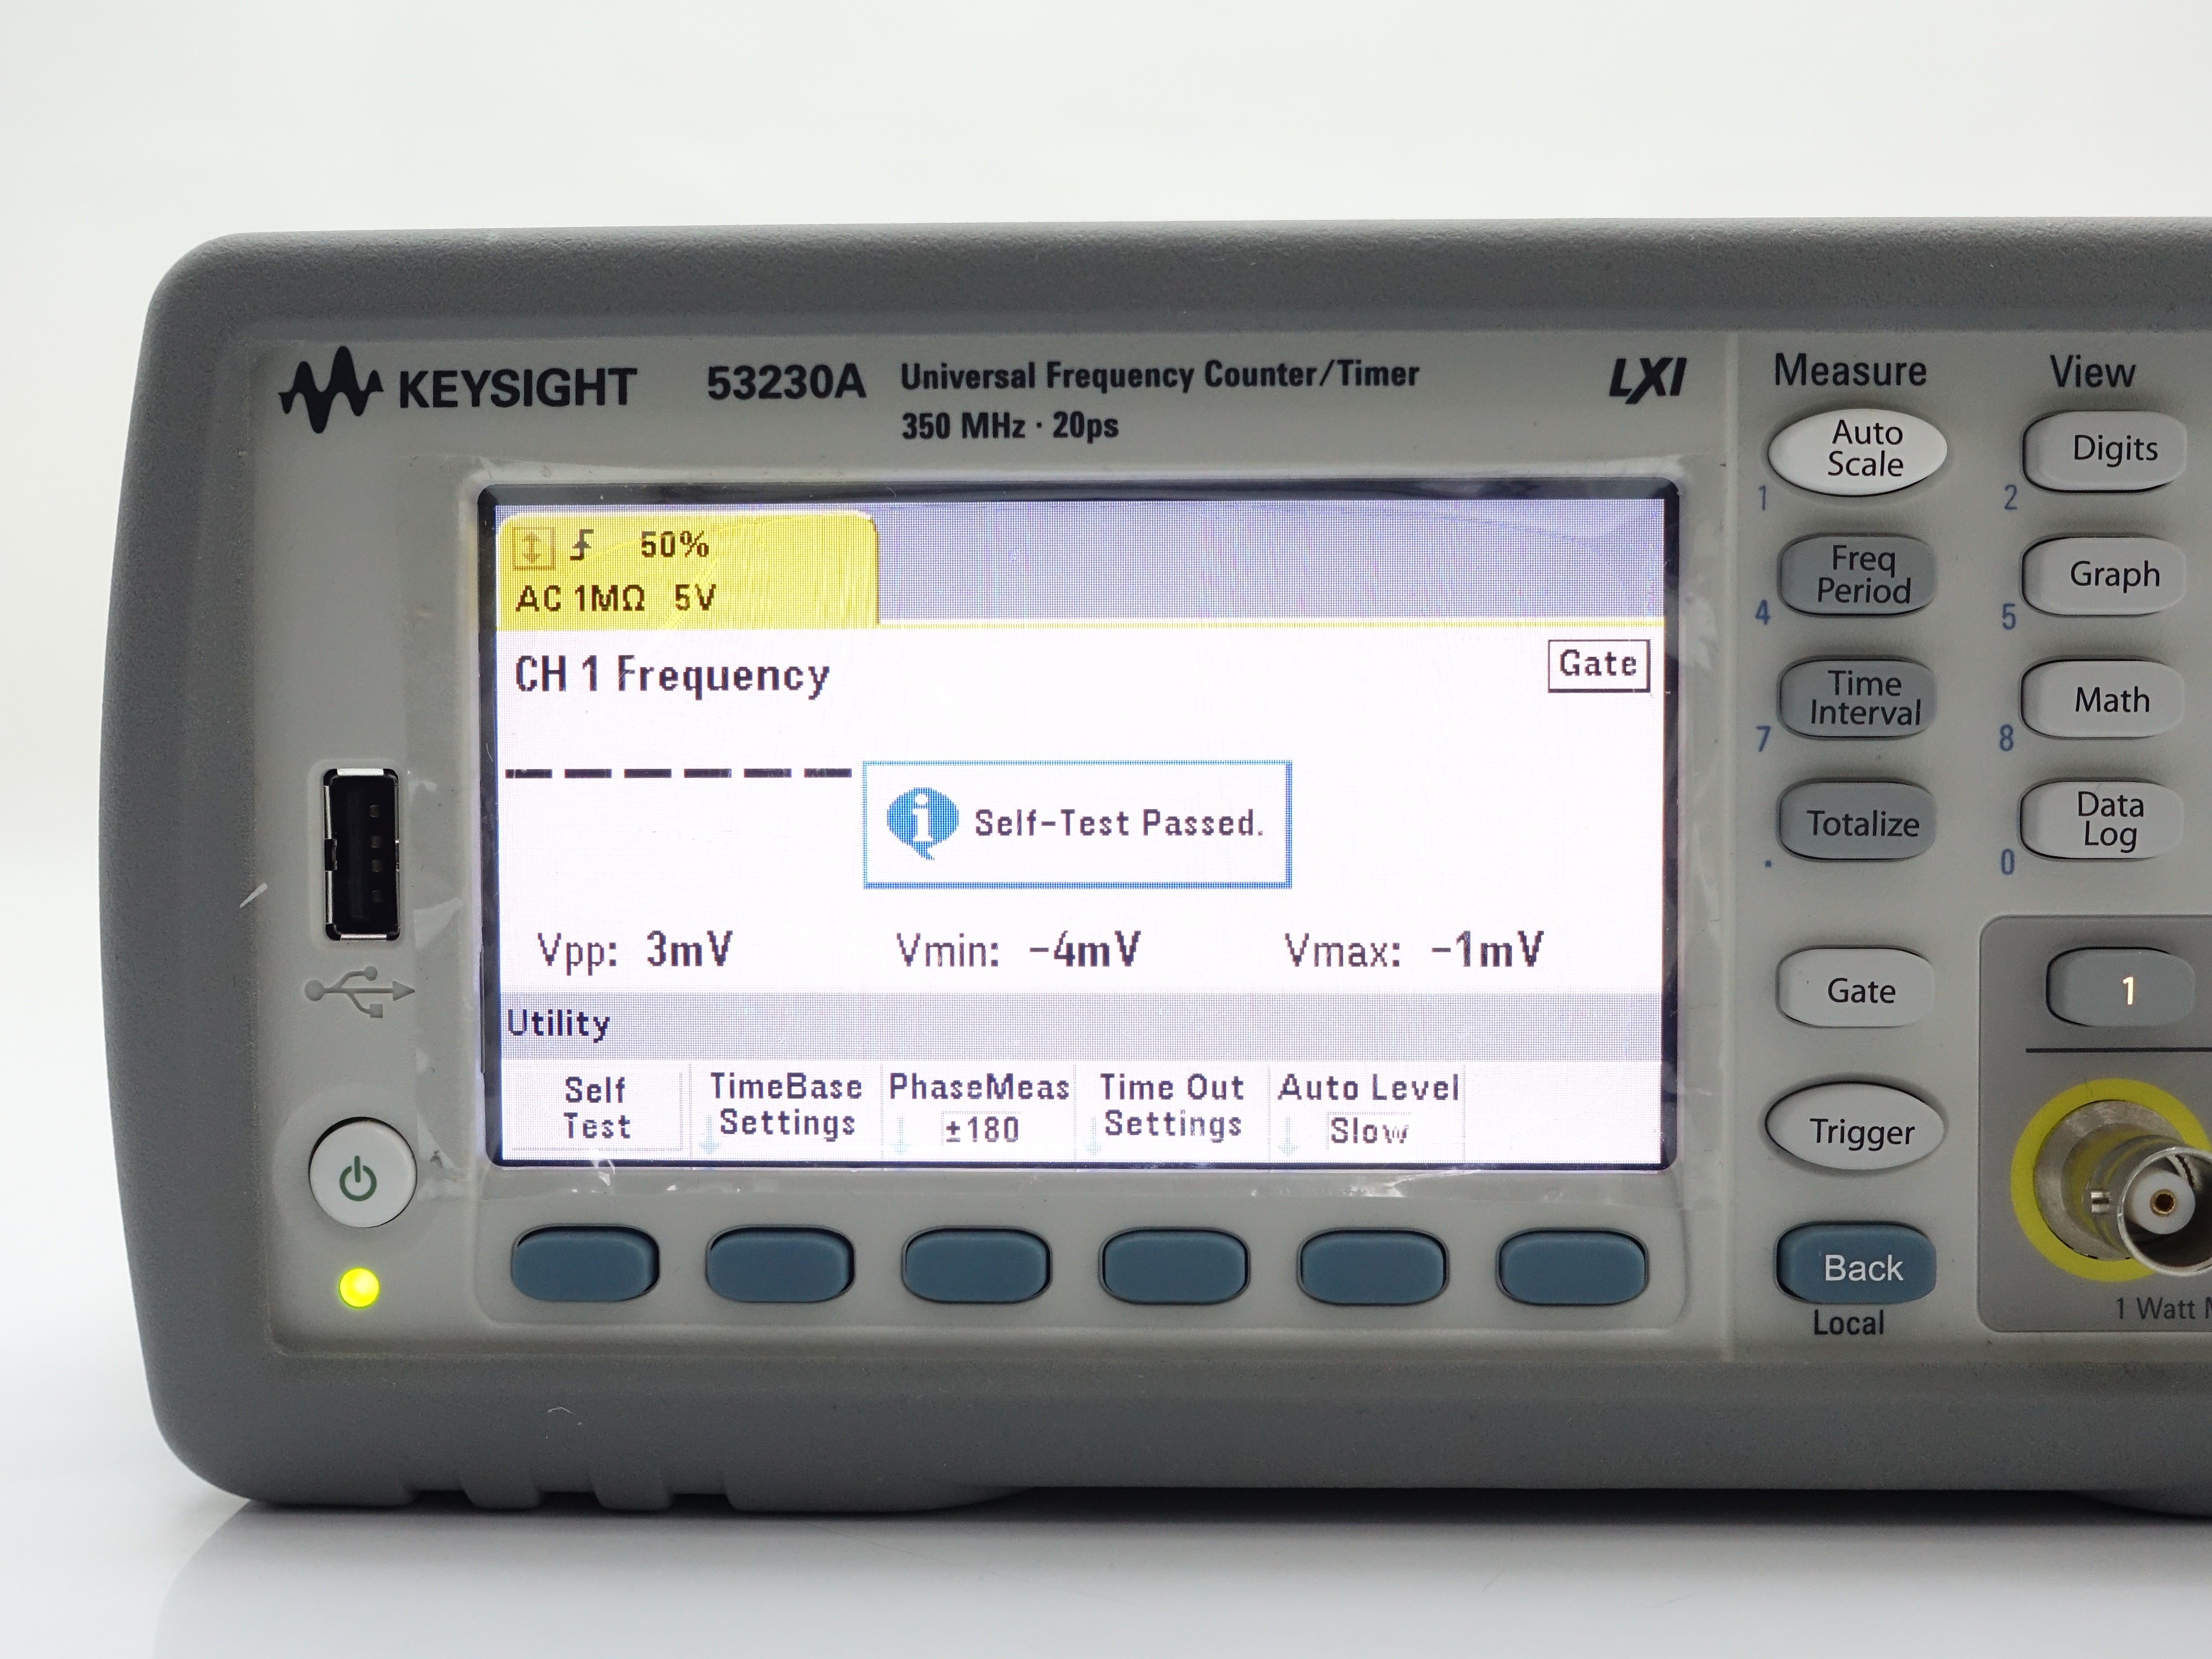 Keysight 53230A Universal Frequency Counter & Timer / 350 MHz / 12 Digits/s / 20 ps